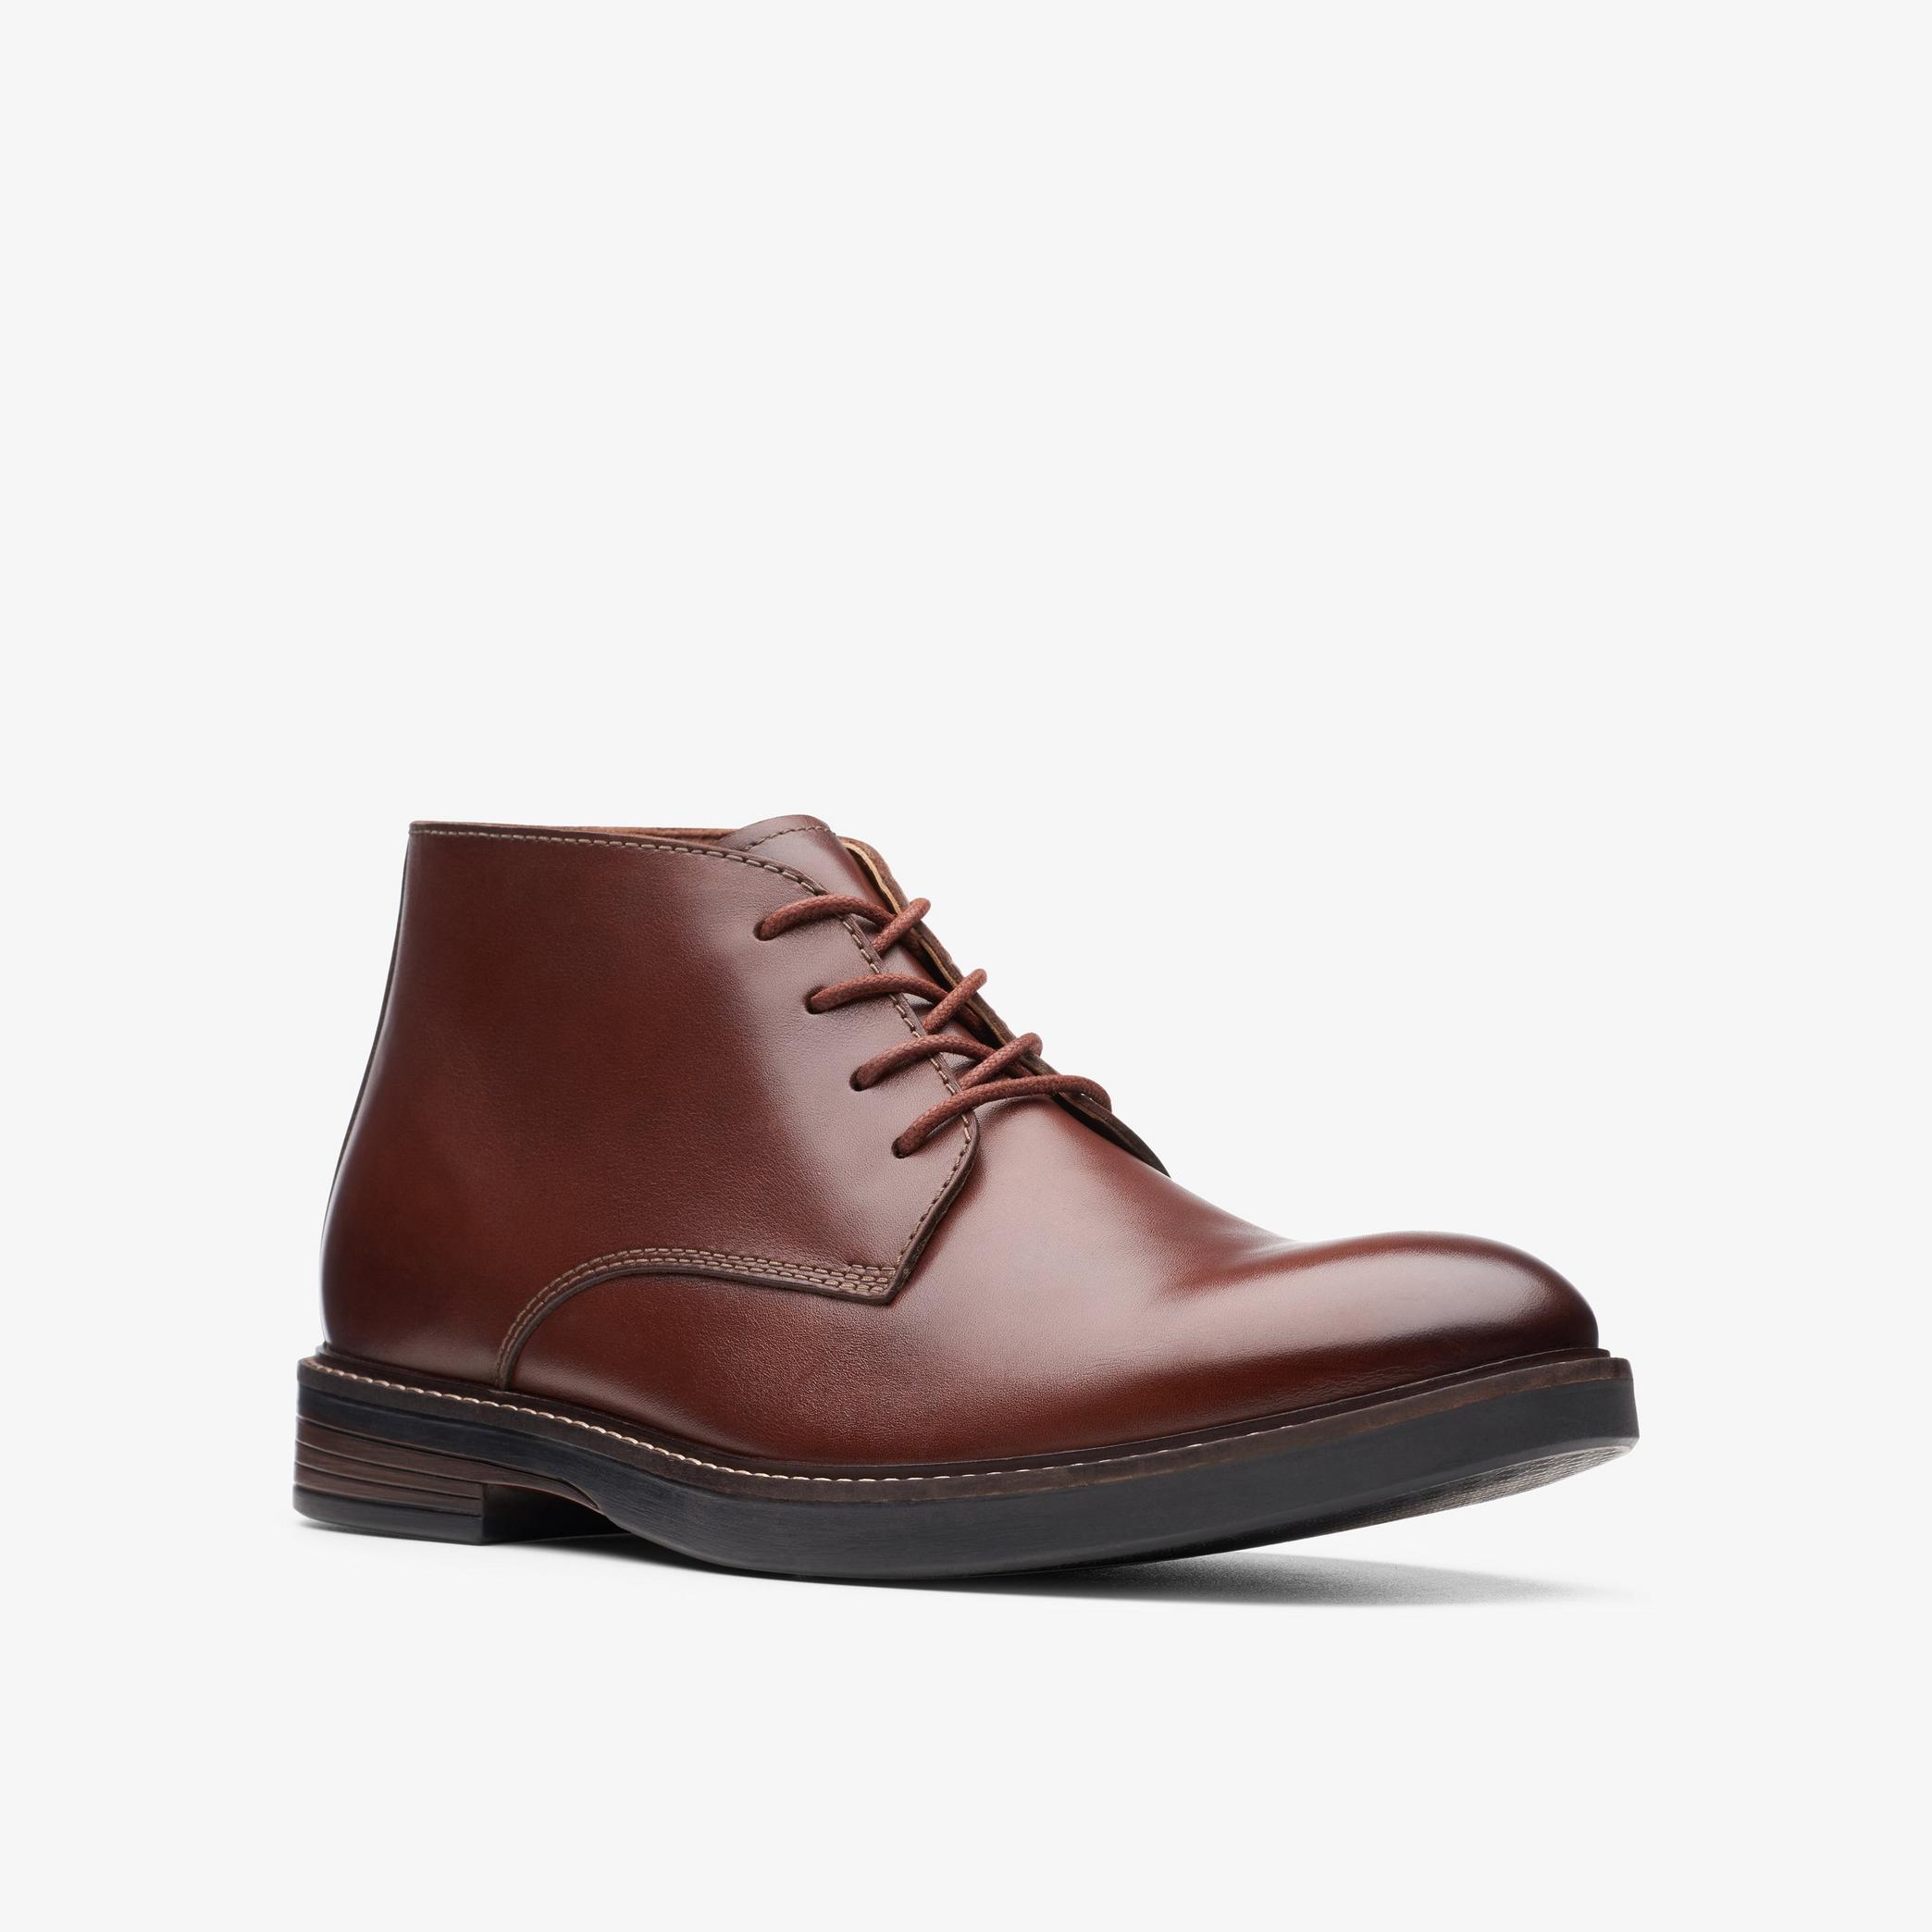 Paulson Mid Mahogany Leather Ankle Boots, view 3 of 6